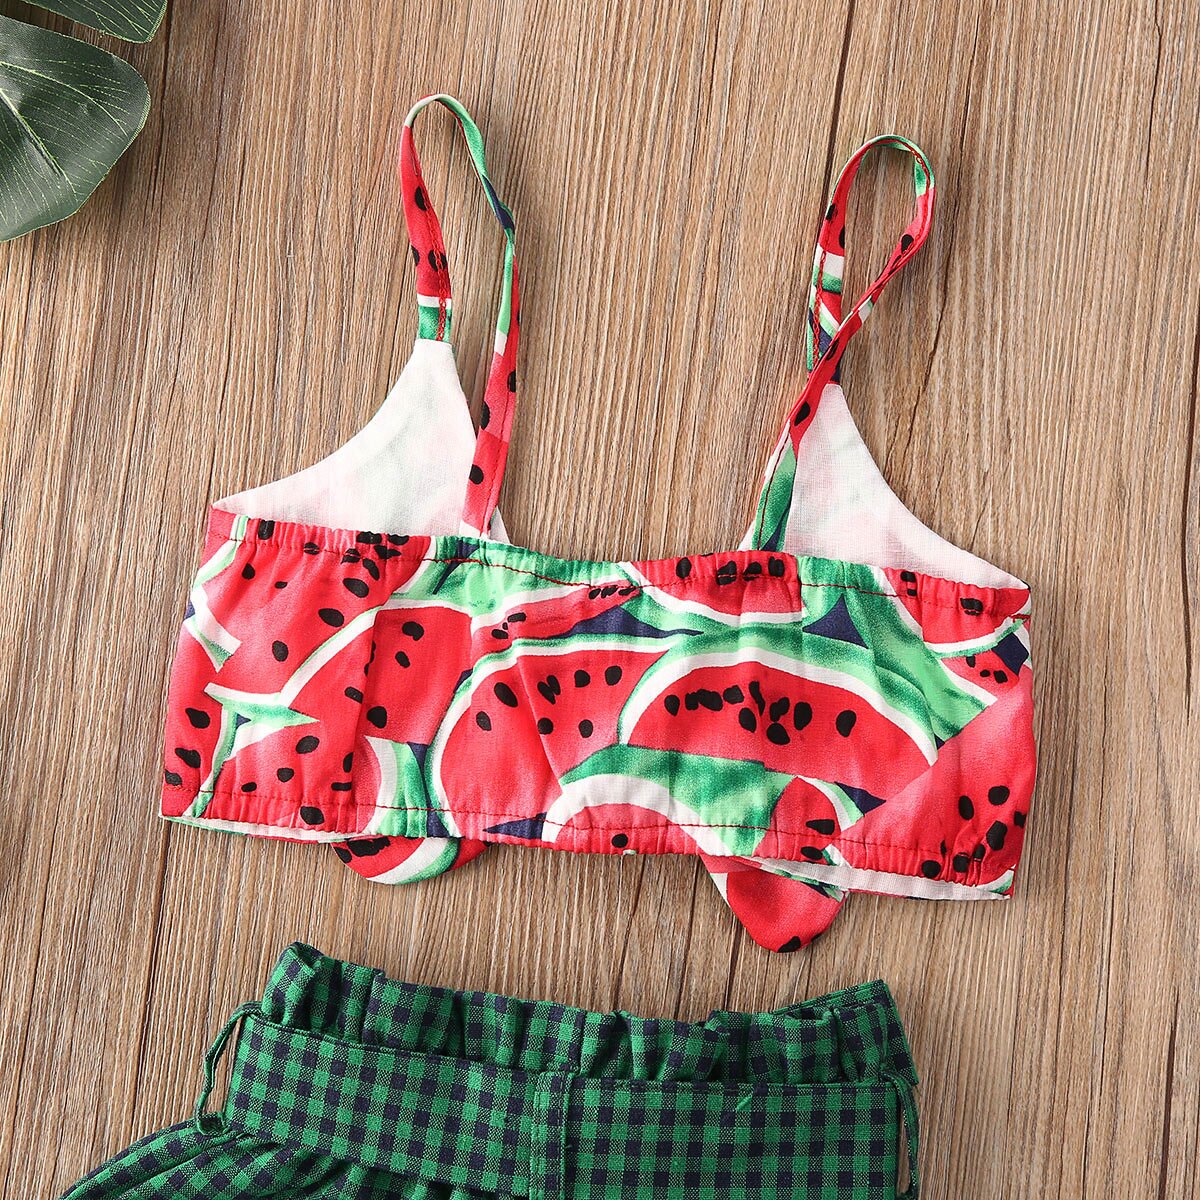 Emmababy-Summer-Toddler-Baby-Girls-Clothes-Watermelon-Bow-Vest-Crop-Tops-Shirt-Plaid-Short-Pants-Outfits-5